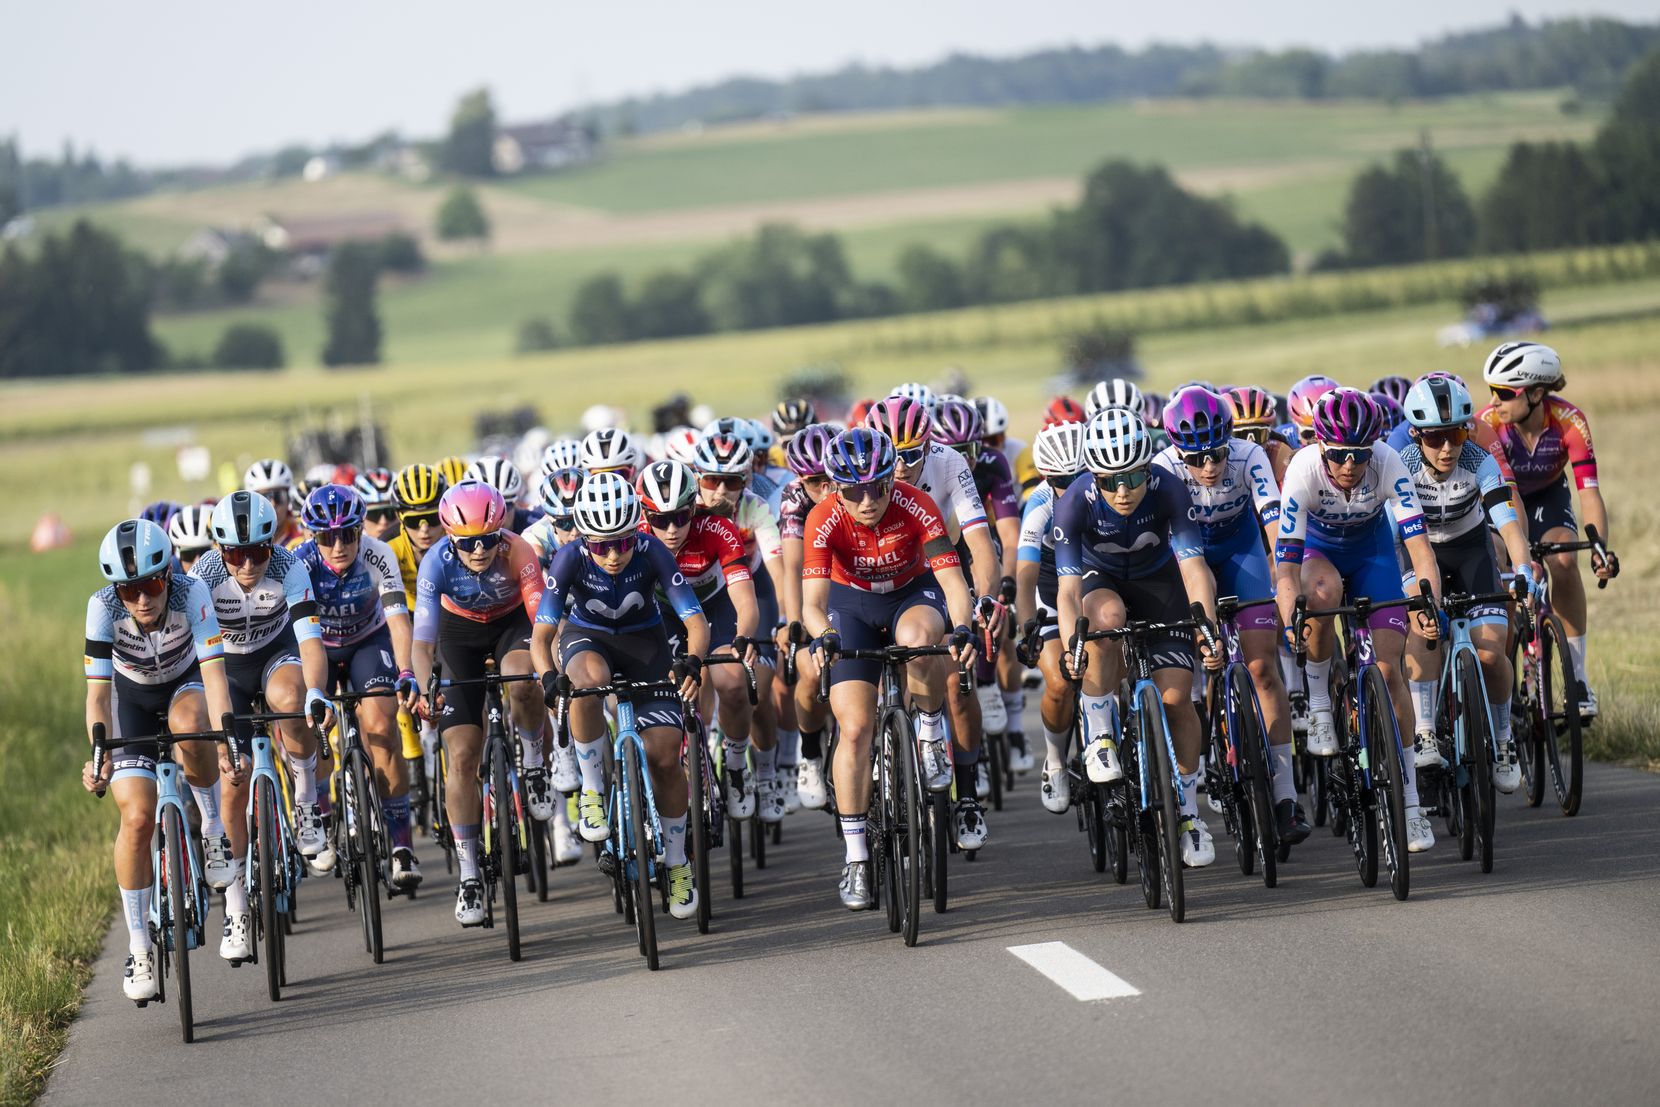 The peloton during the first stage, at the 3rd Tour de Suisse UCI WorldTour cycling women's race, on Saturday, June 17, 2023, in Weinfelden, Switzerland. (KEYSTONE/Gian Ehrenzeller)